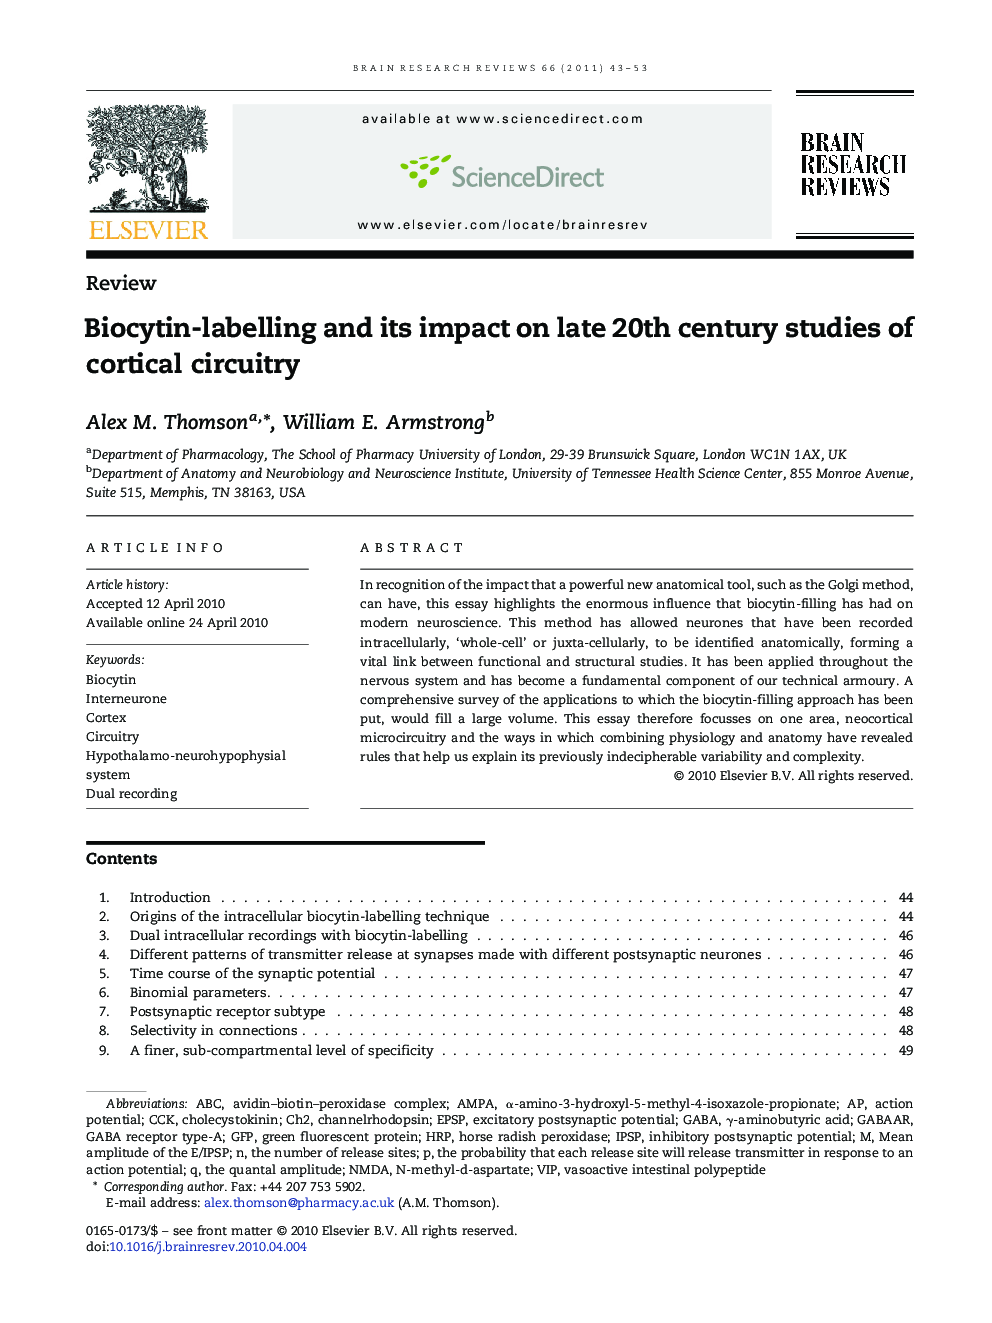 Biocytin-labelling and its impact on late 20th century studies of cortical circuitry